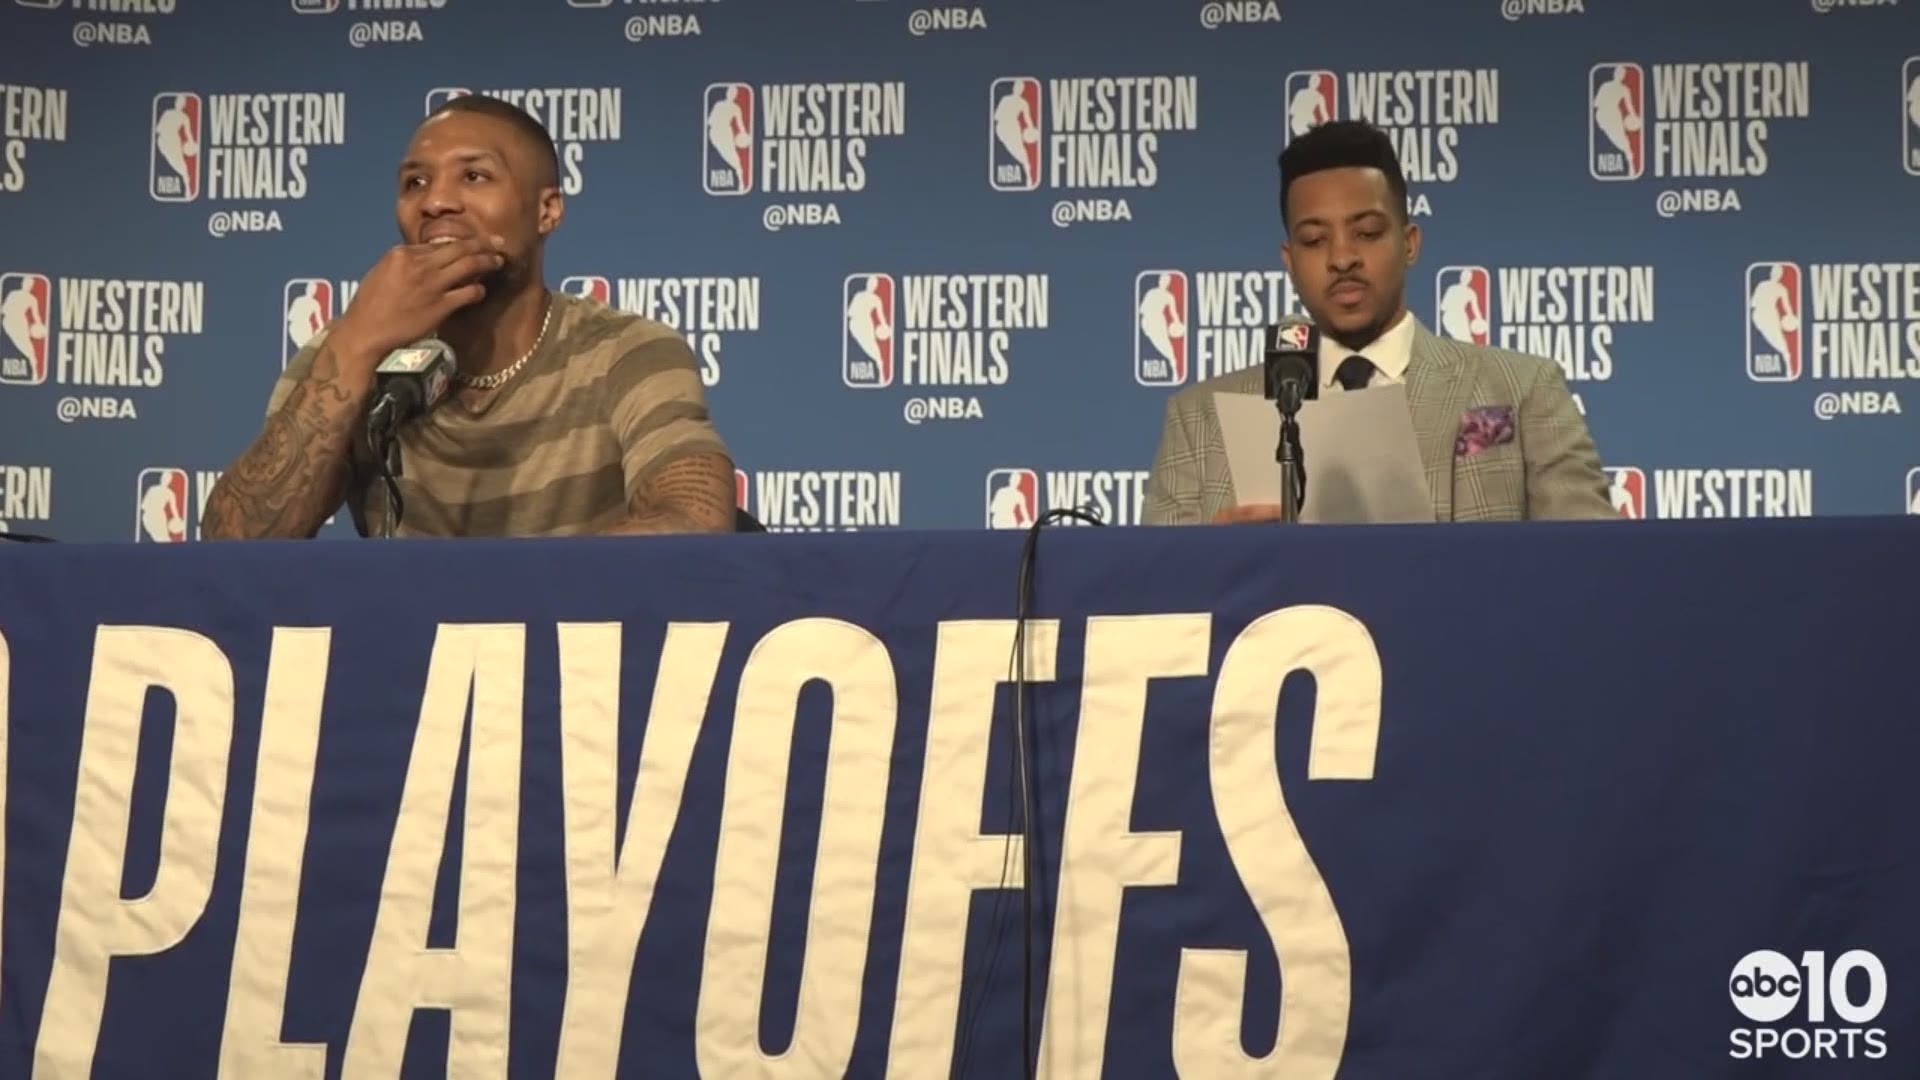 Portland Trail Blazers guards Damian Lillard and CJ McCollum discuss falling 0-2 to the Golden State Warriors in the Western Conference Finals after a 114-111 loss in Game 2.